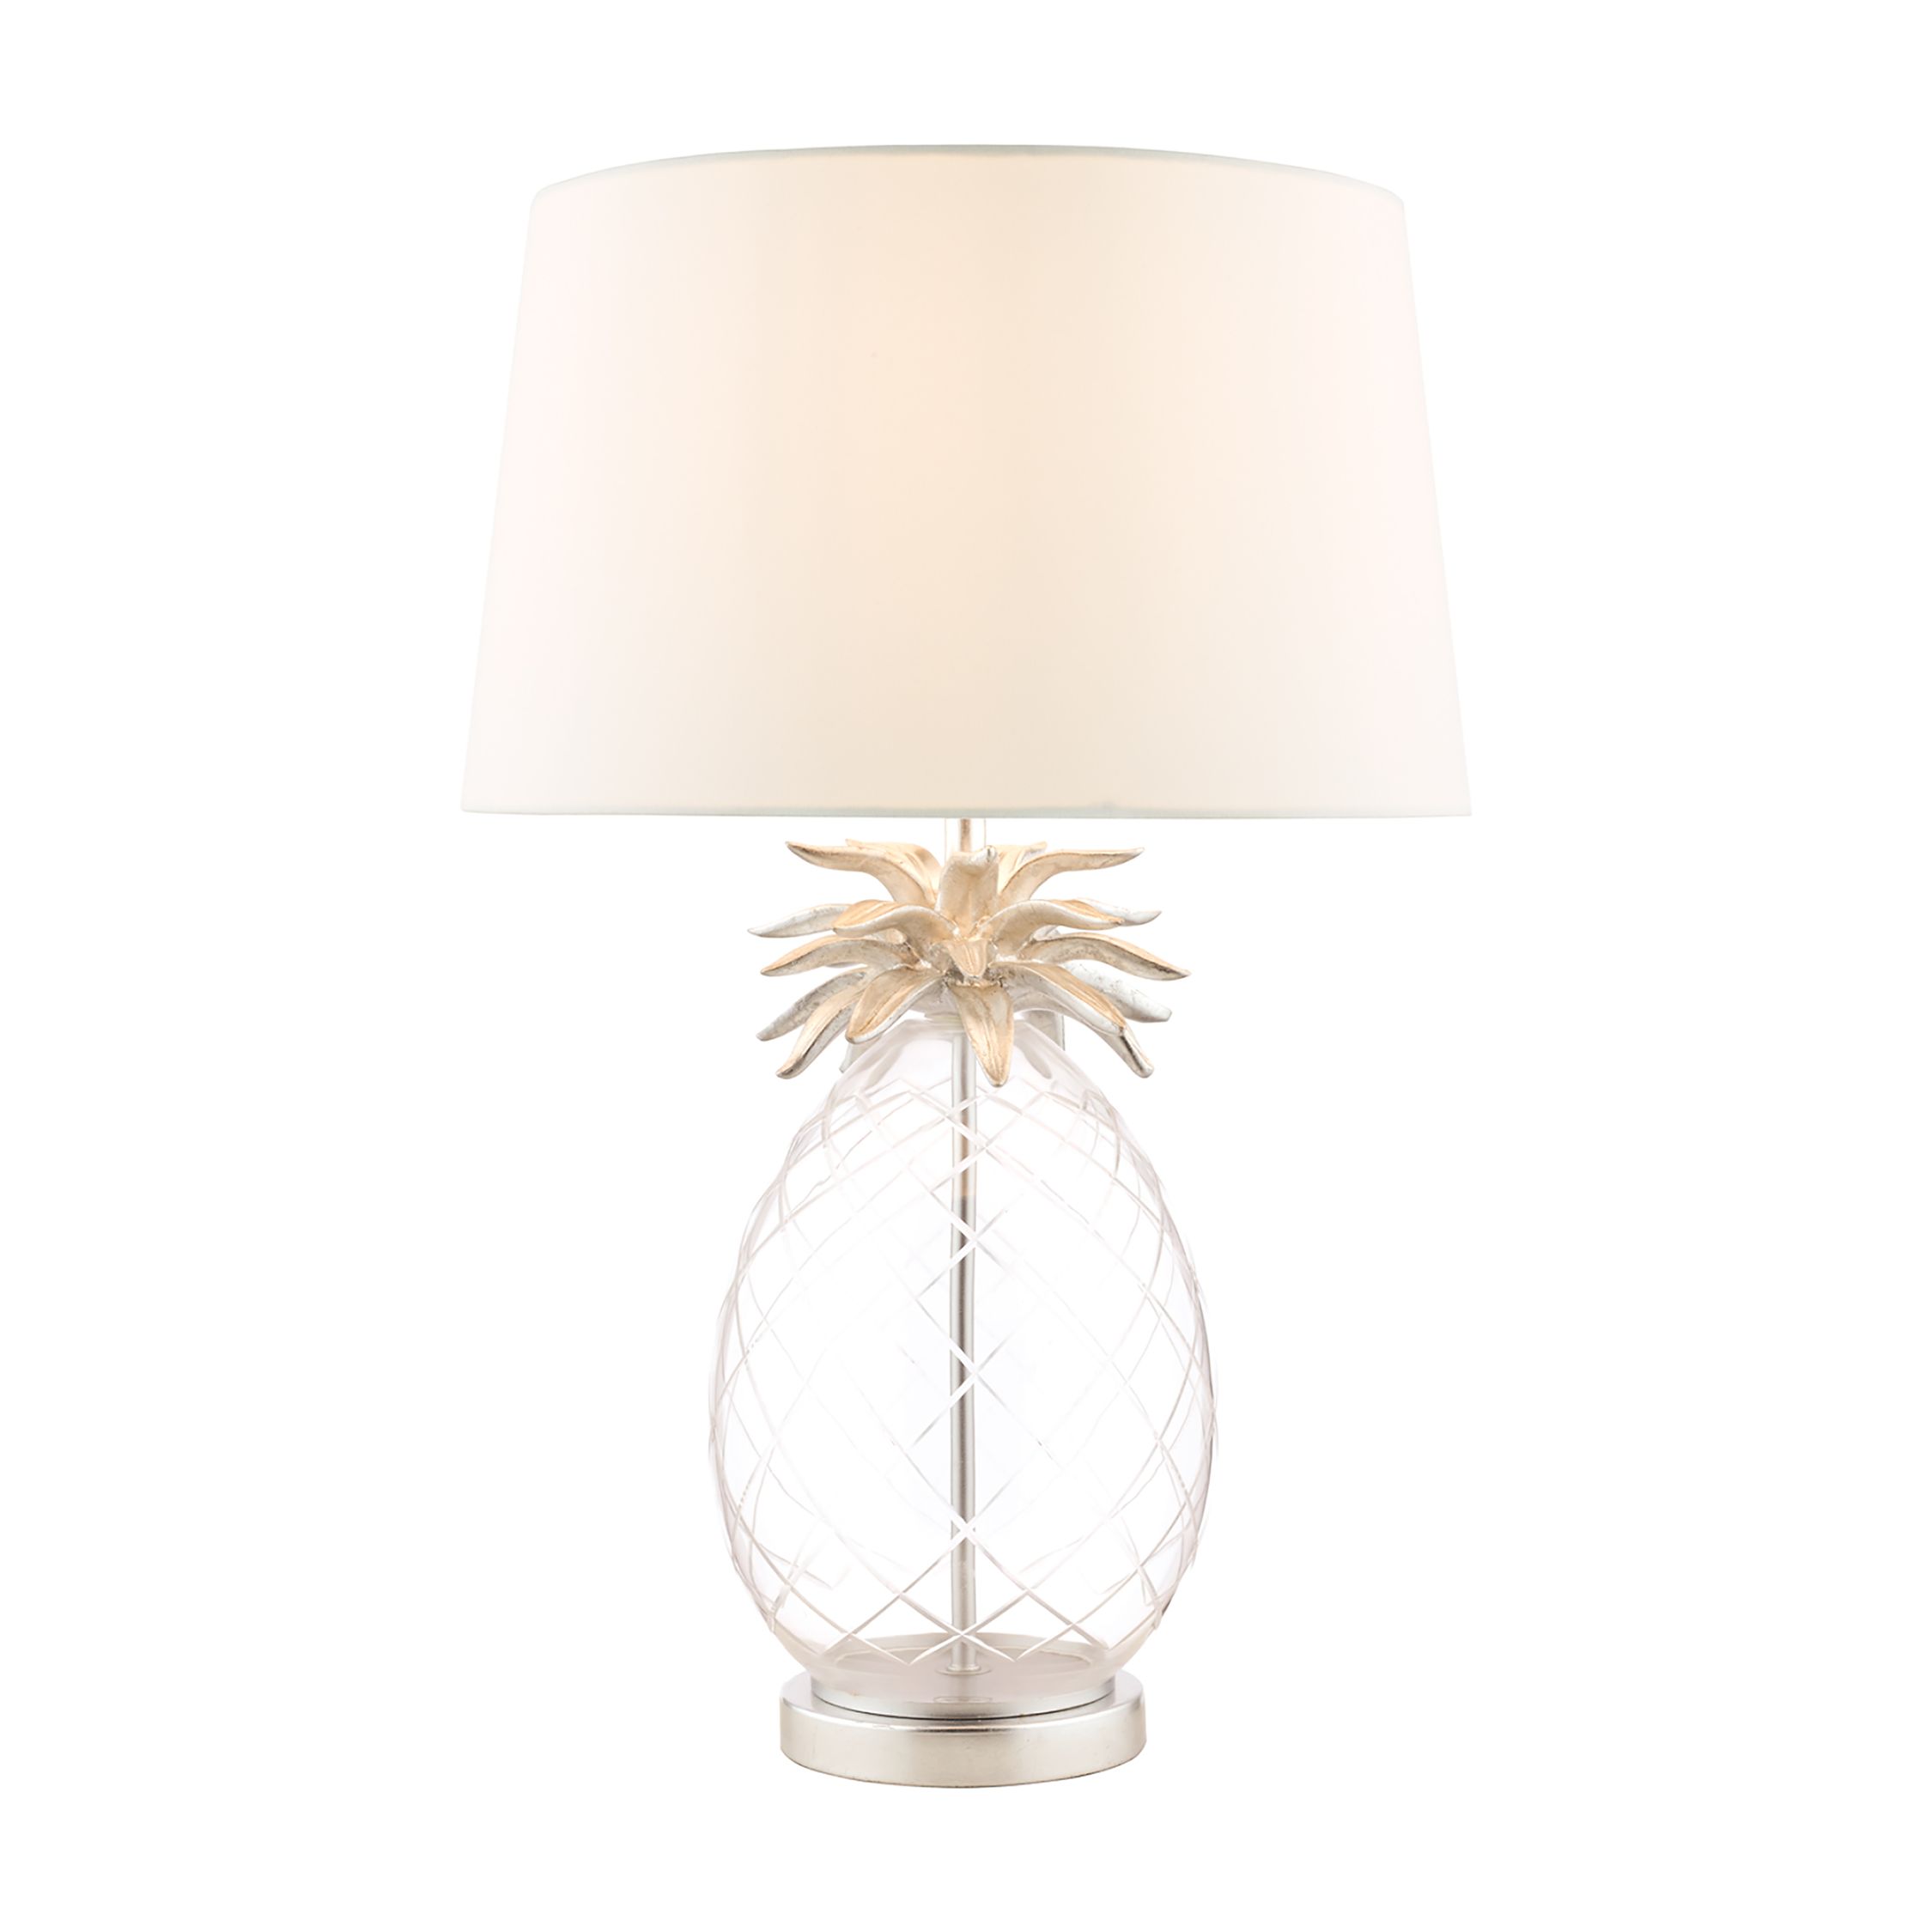 Photo of Laura ashley pineapple glass large table lamp